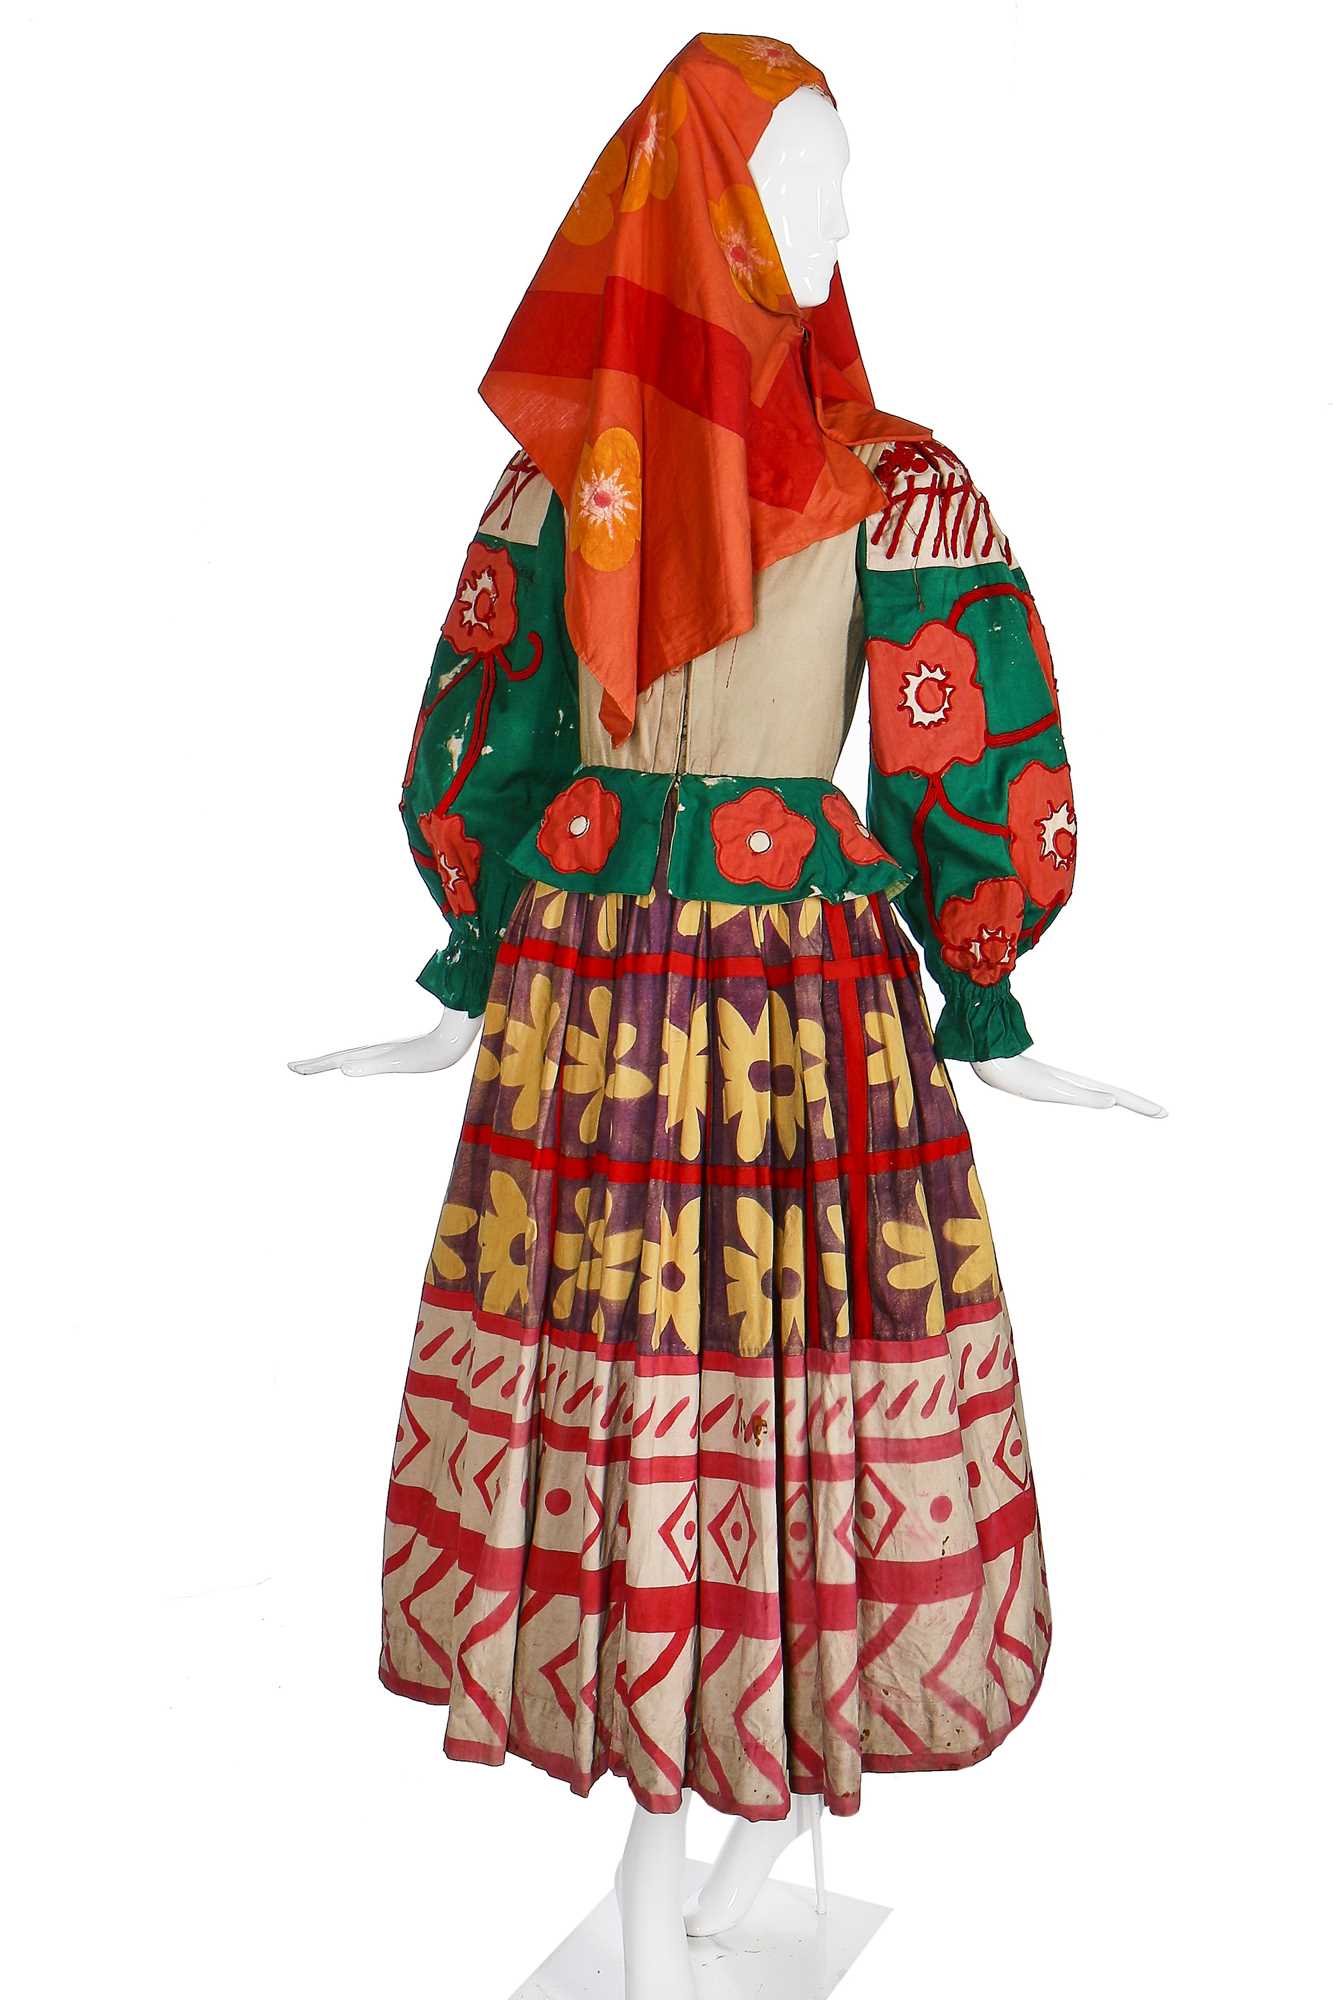 Lot 53 - Diaghilev's Ballets Russes 'Le Coq d'Or' costume for a female subject of King Dodon